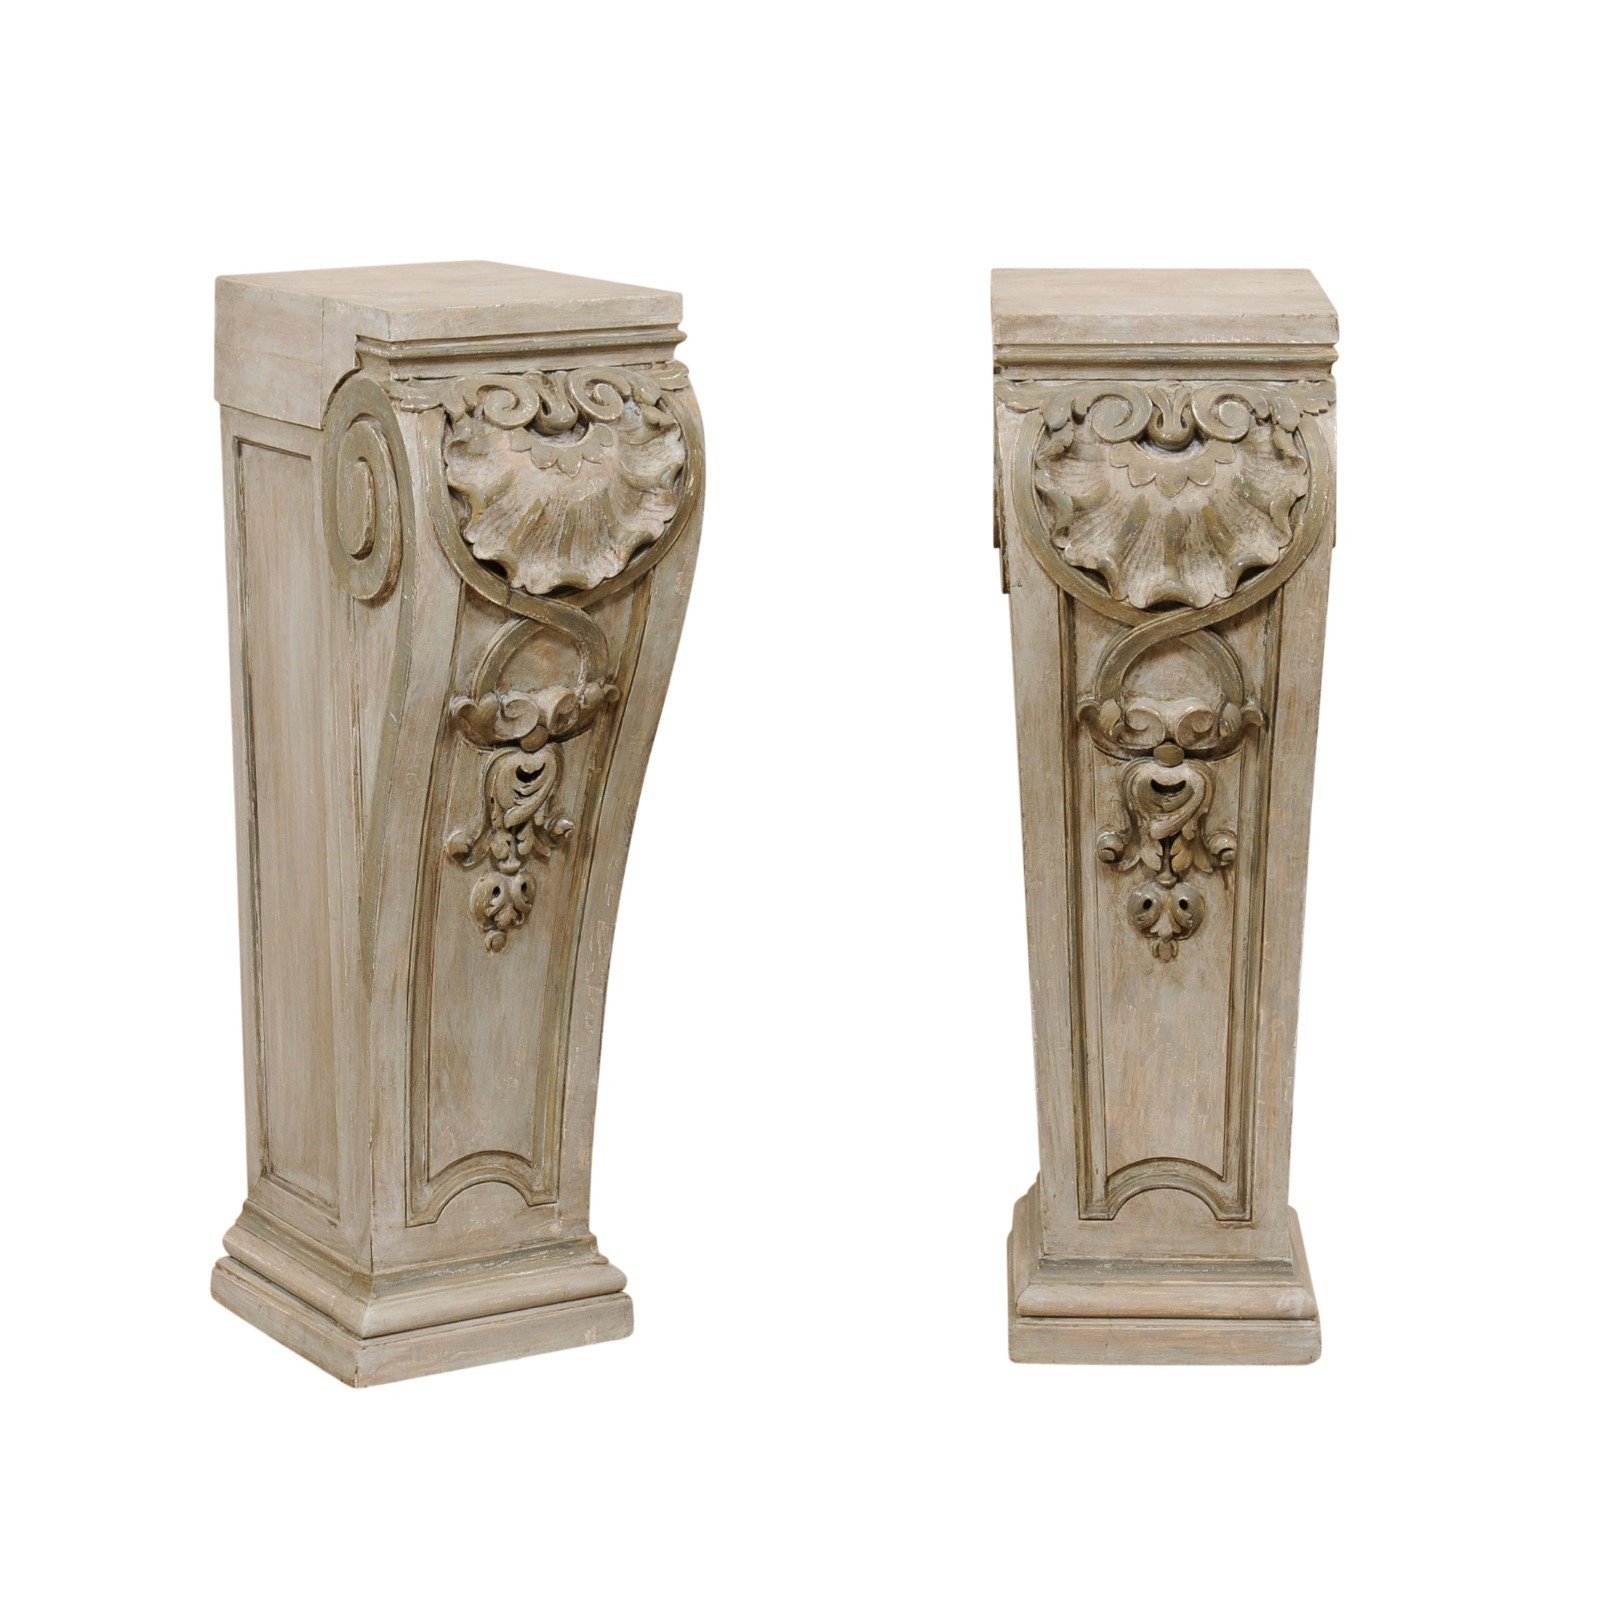 Pair 40" Tall Wood-Carved Antique Pedestals